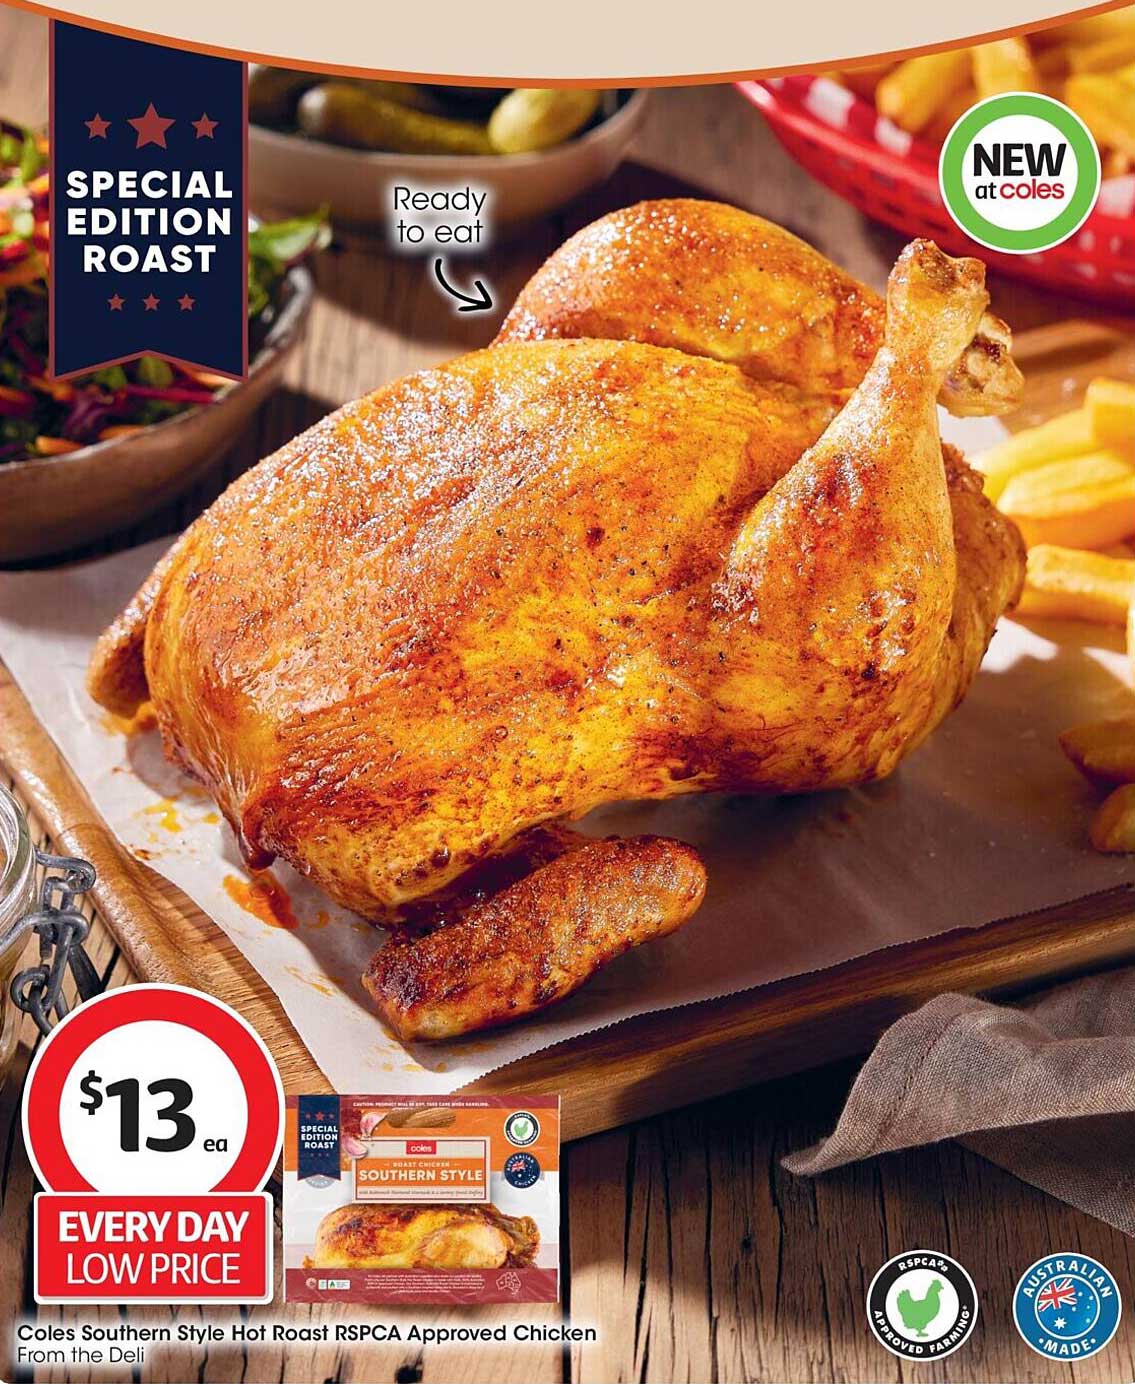 Coles Southern Style Hot Roast Rspca Approved Chicken Offer at Coles ...